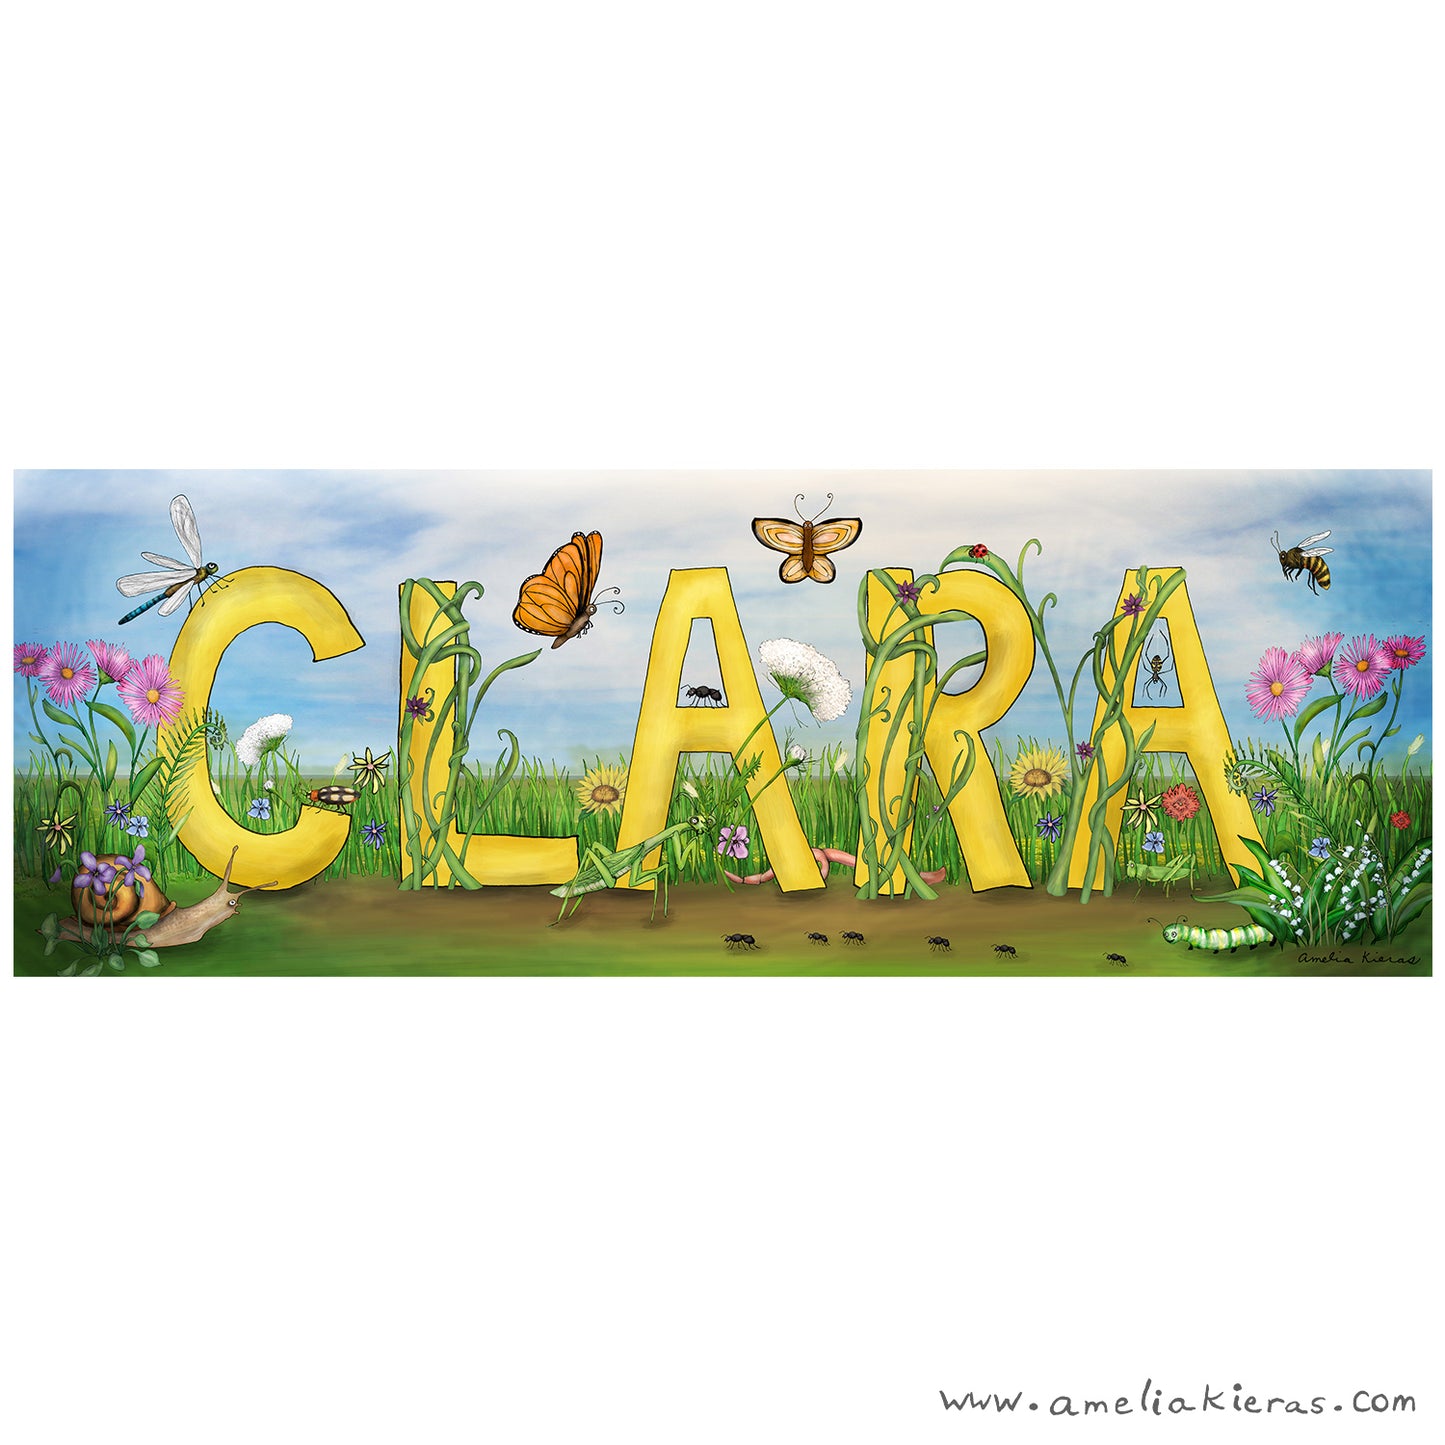 Personalized Child Name Sign - Flowers Garden Theme